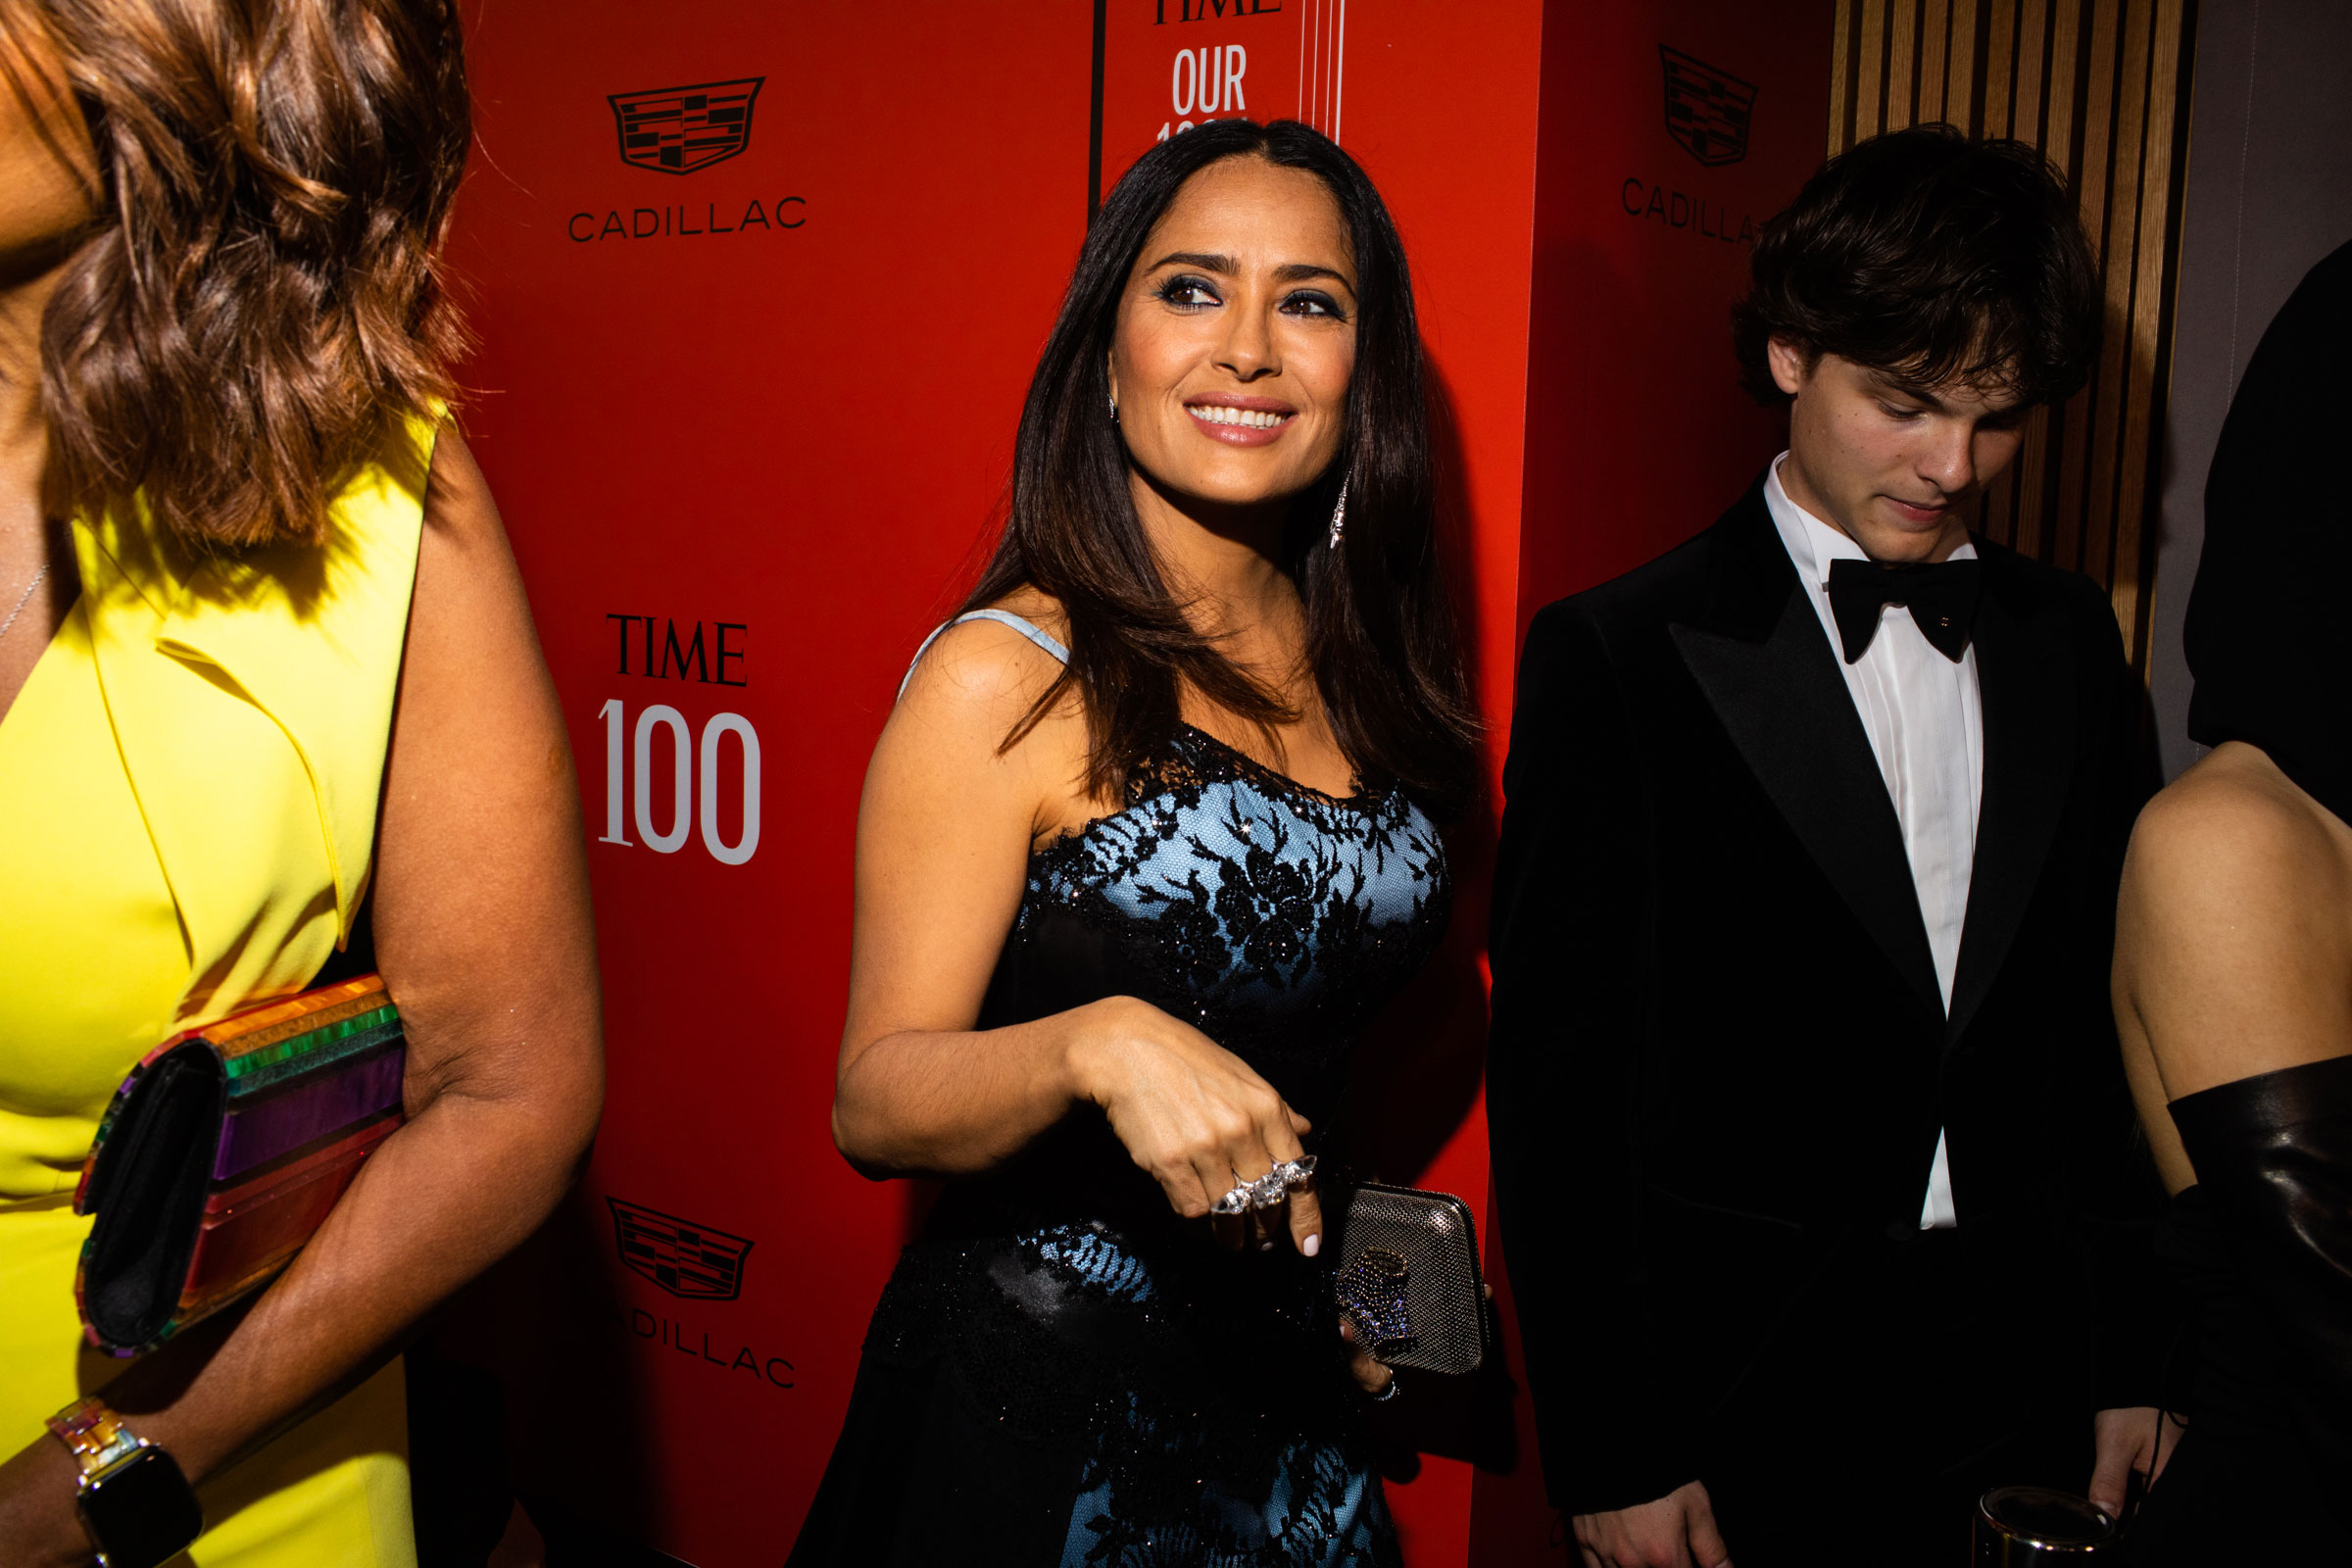 Salma Hayek Pinault attends the TIME 100 Gala at Jazz at Lincoln Center in New York City, on April 26, 2023. (Landon Nordeman for TIME)